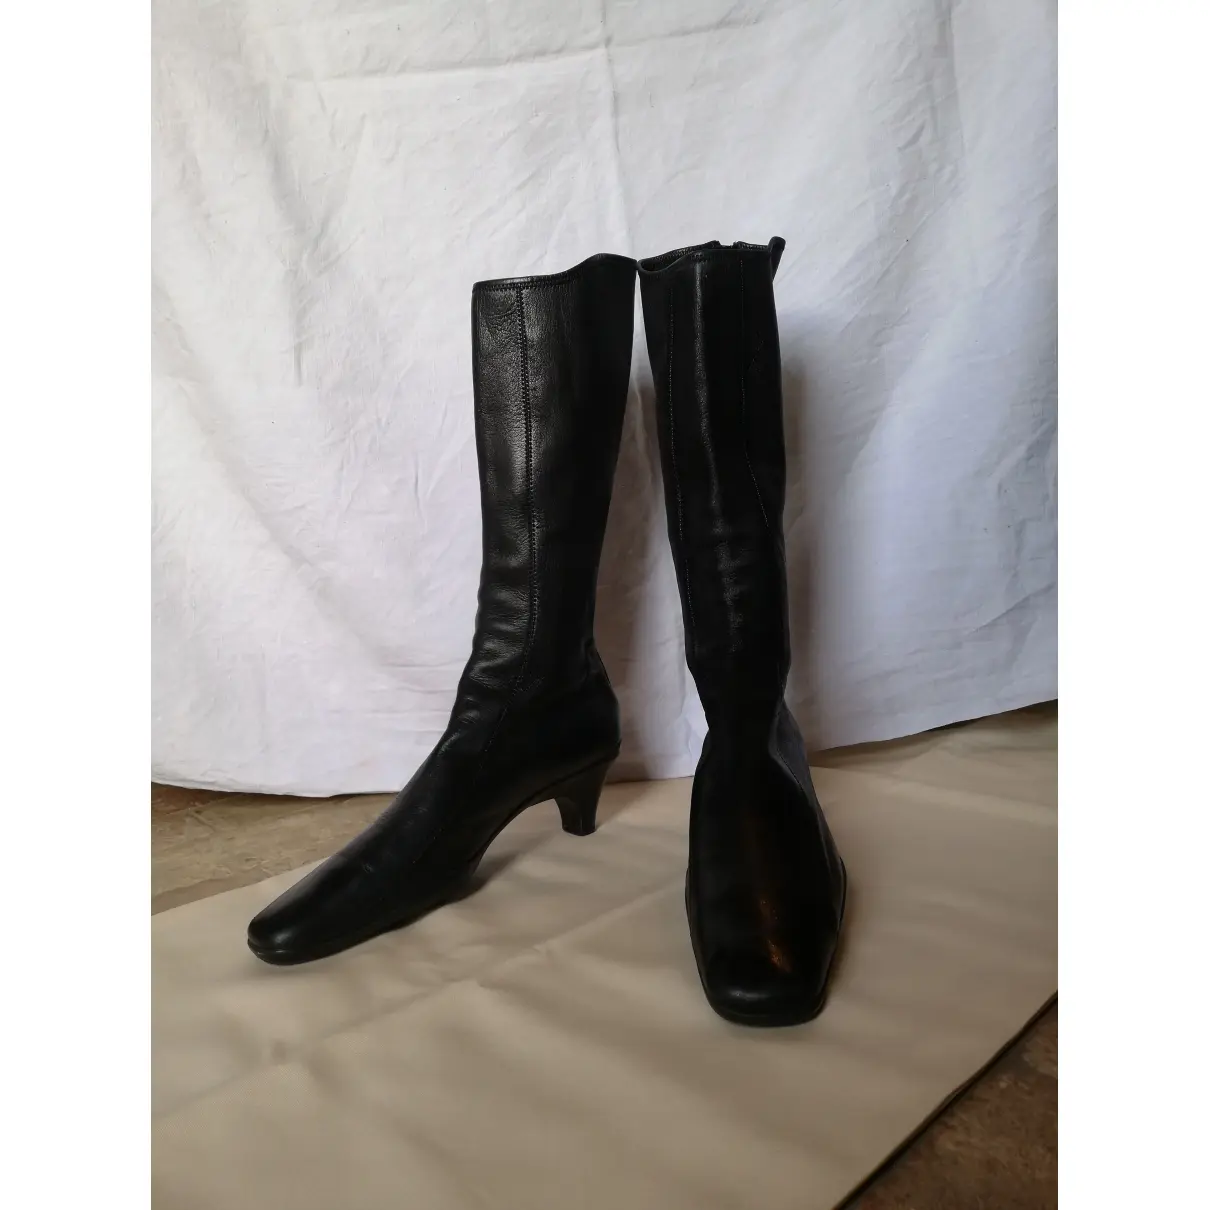 Prada Leather boots for sale - Vintage